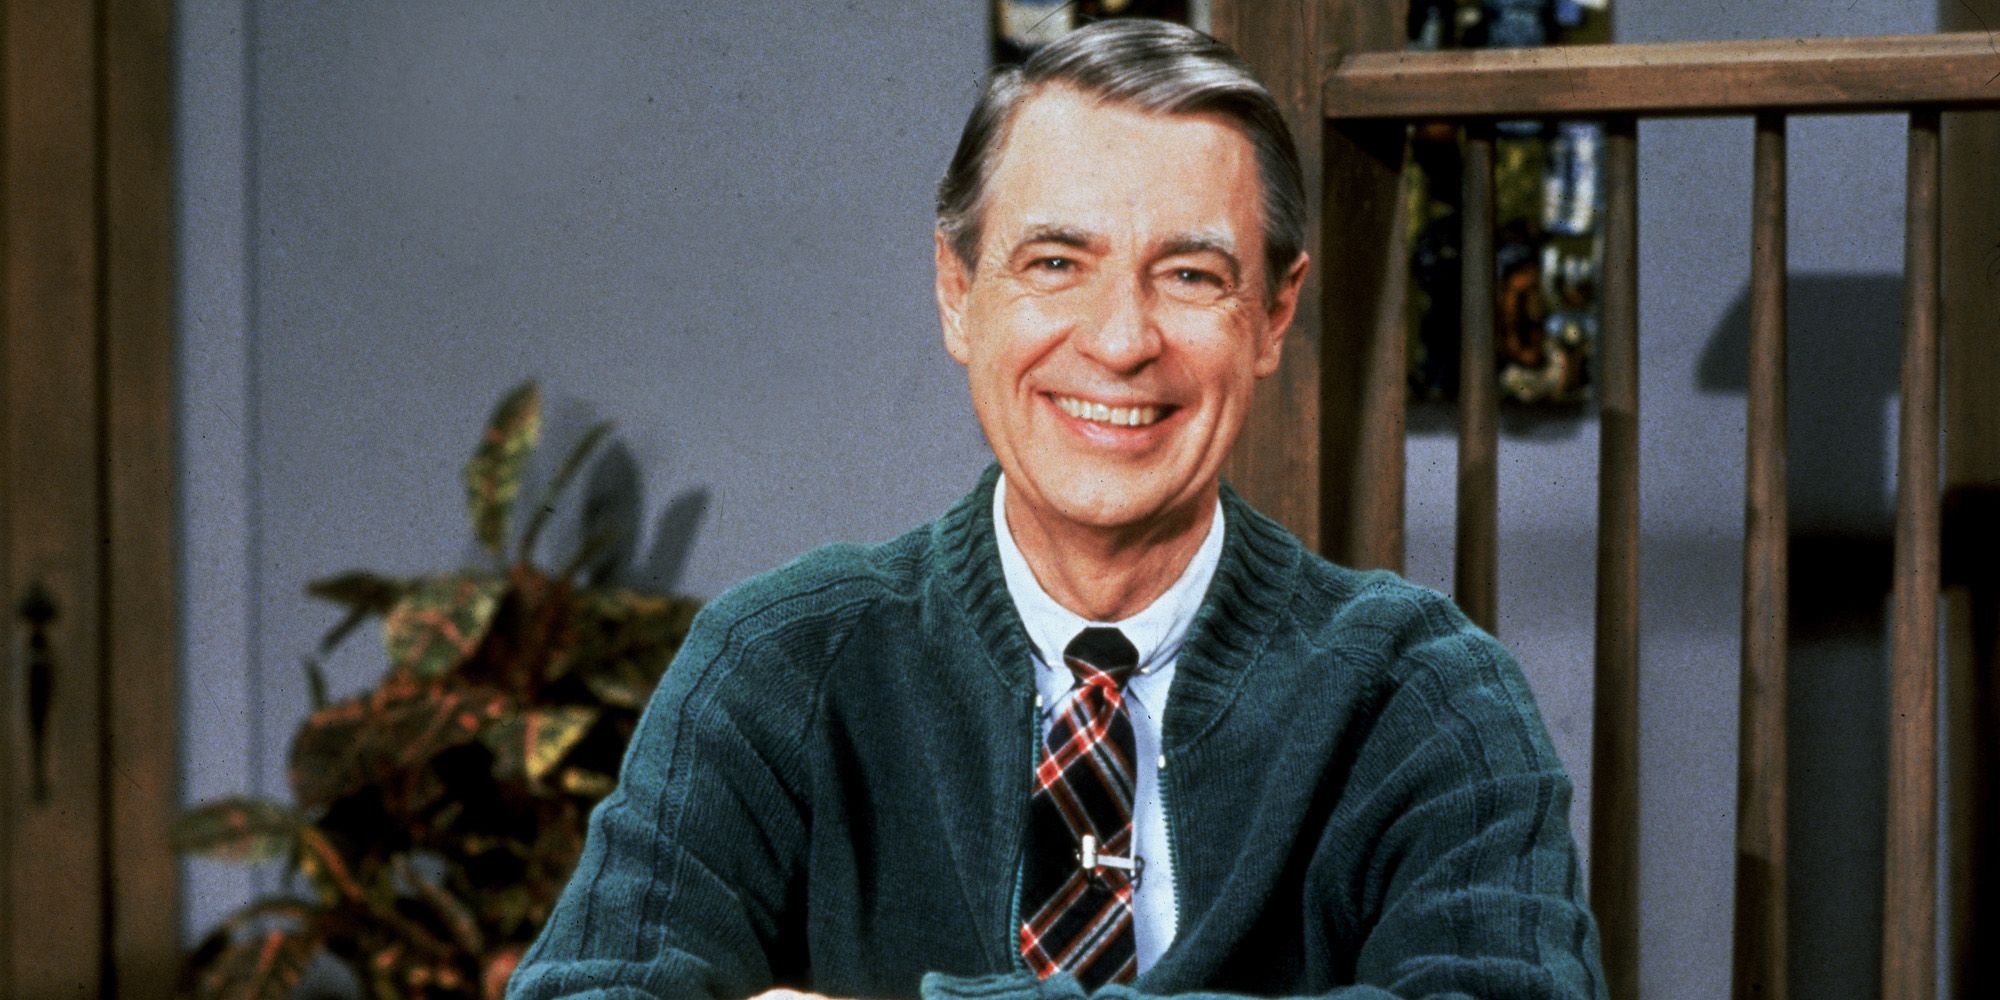 Nudists Day Of The Dead - Can You Say...Hero? - Mr. Rogers Profile Interview